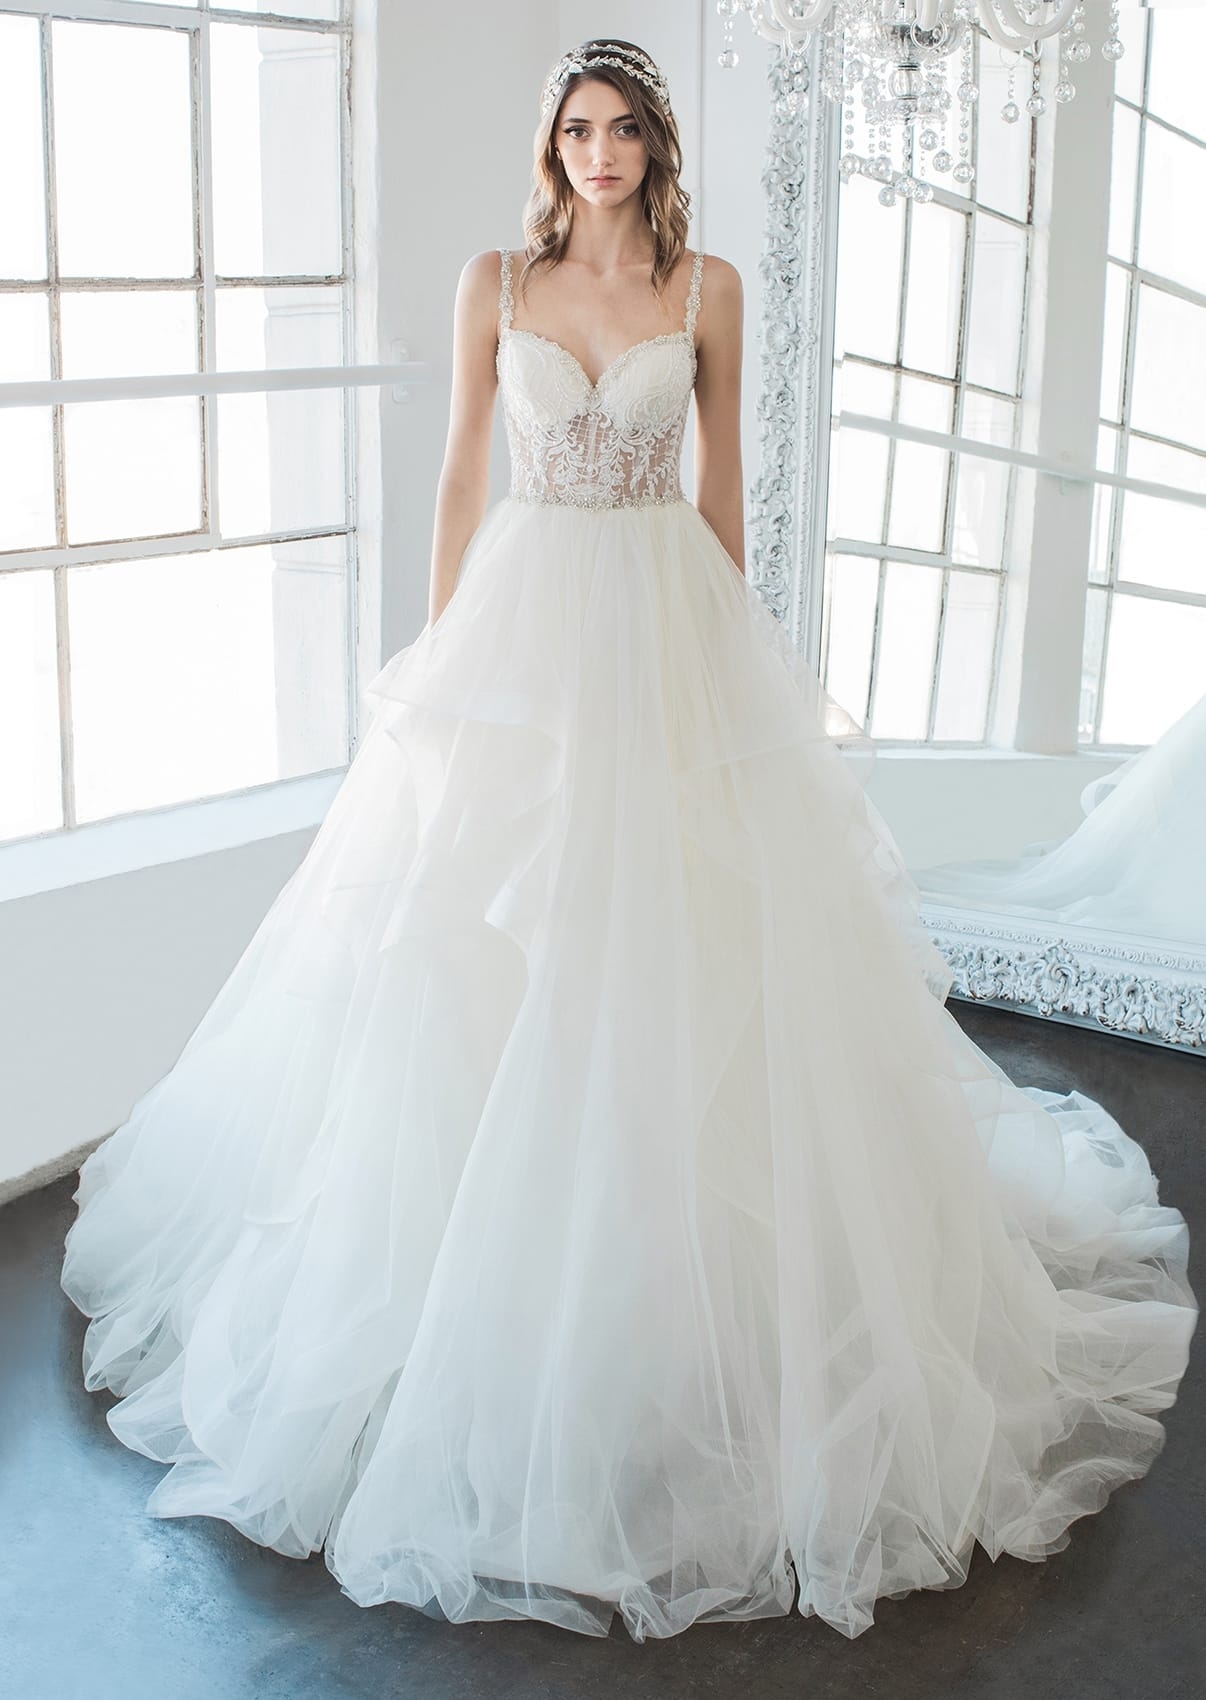 5 Different Types of Wedding Dresses to Choose From